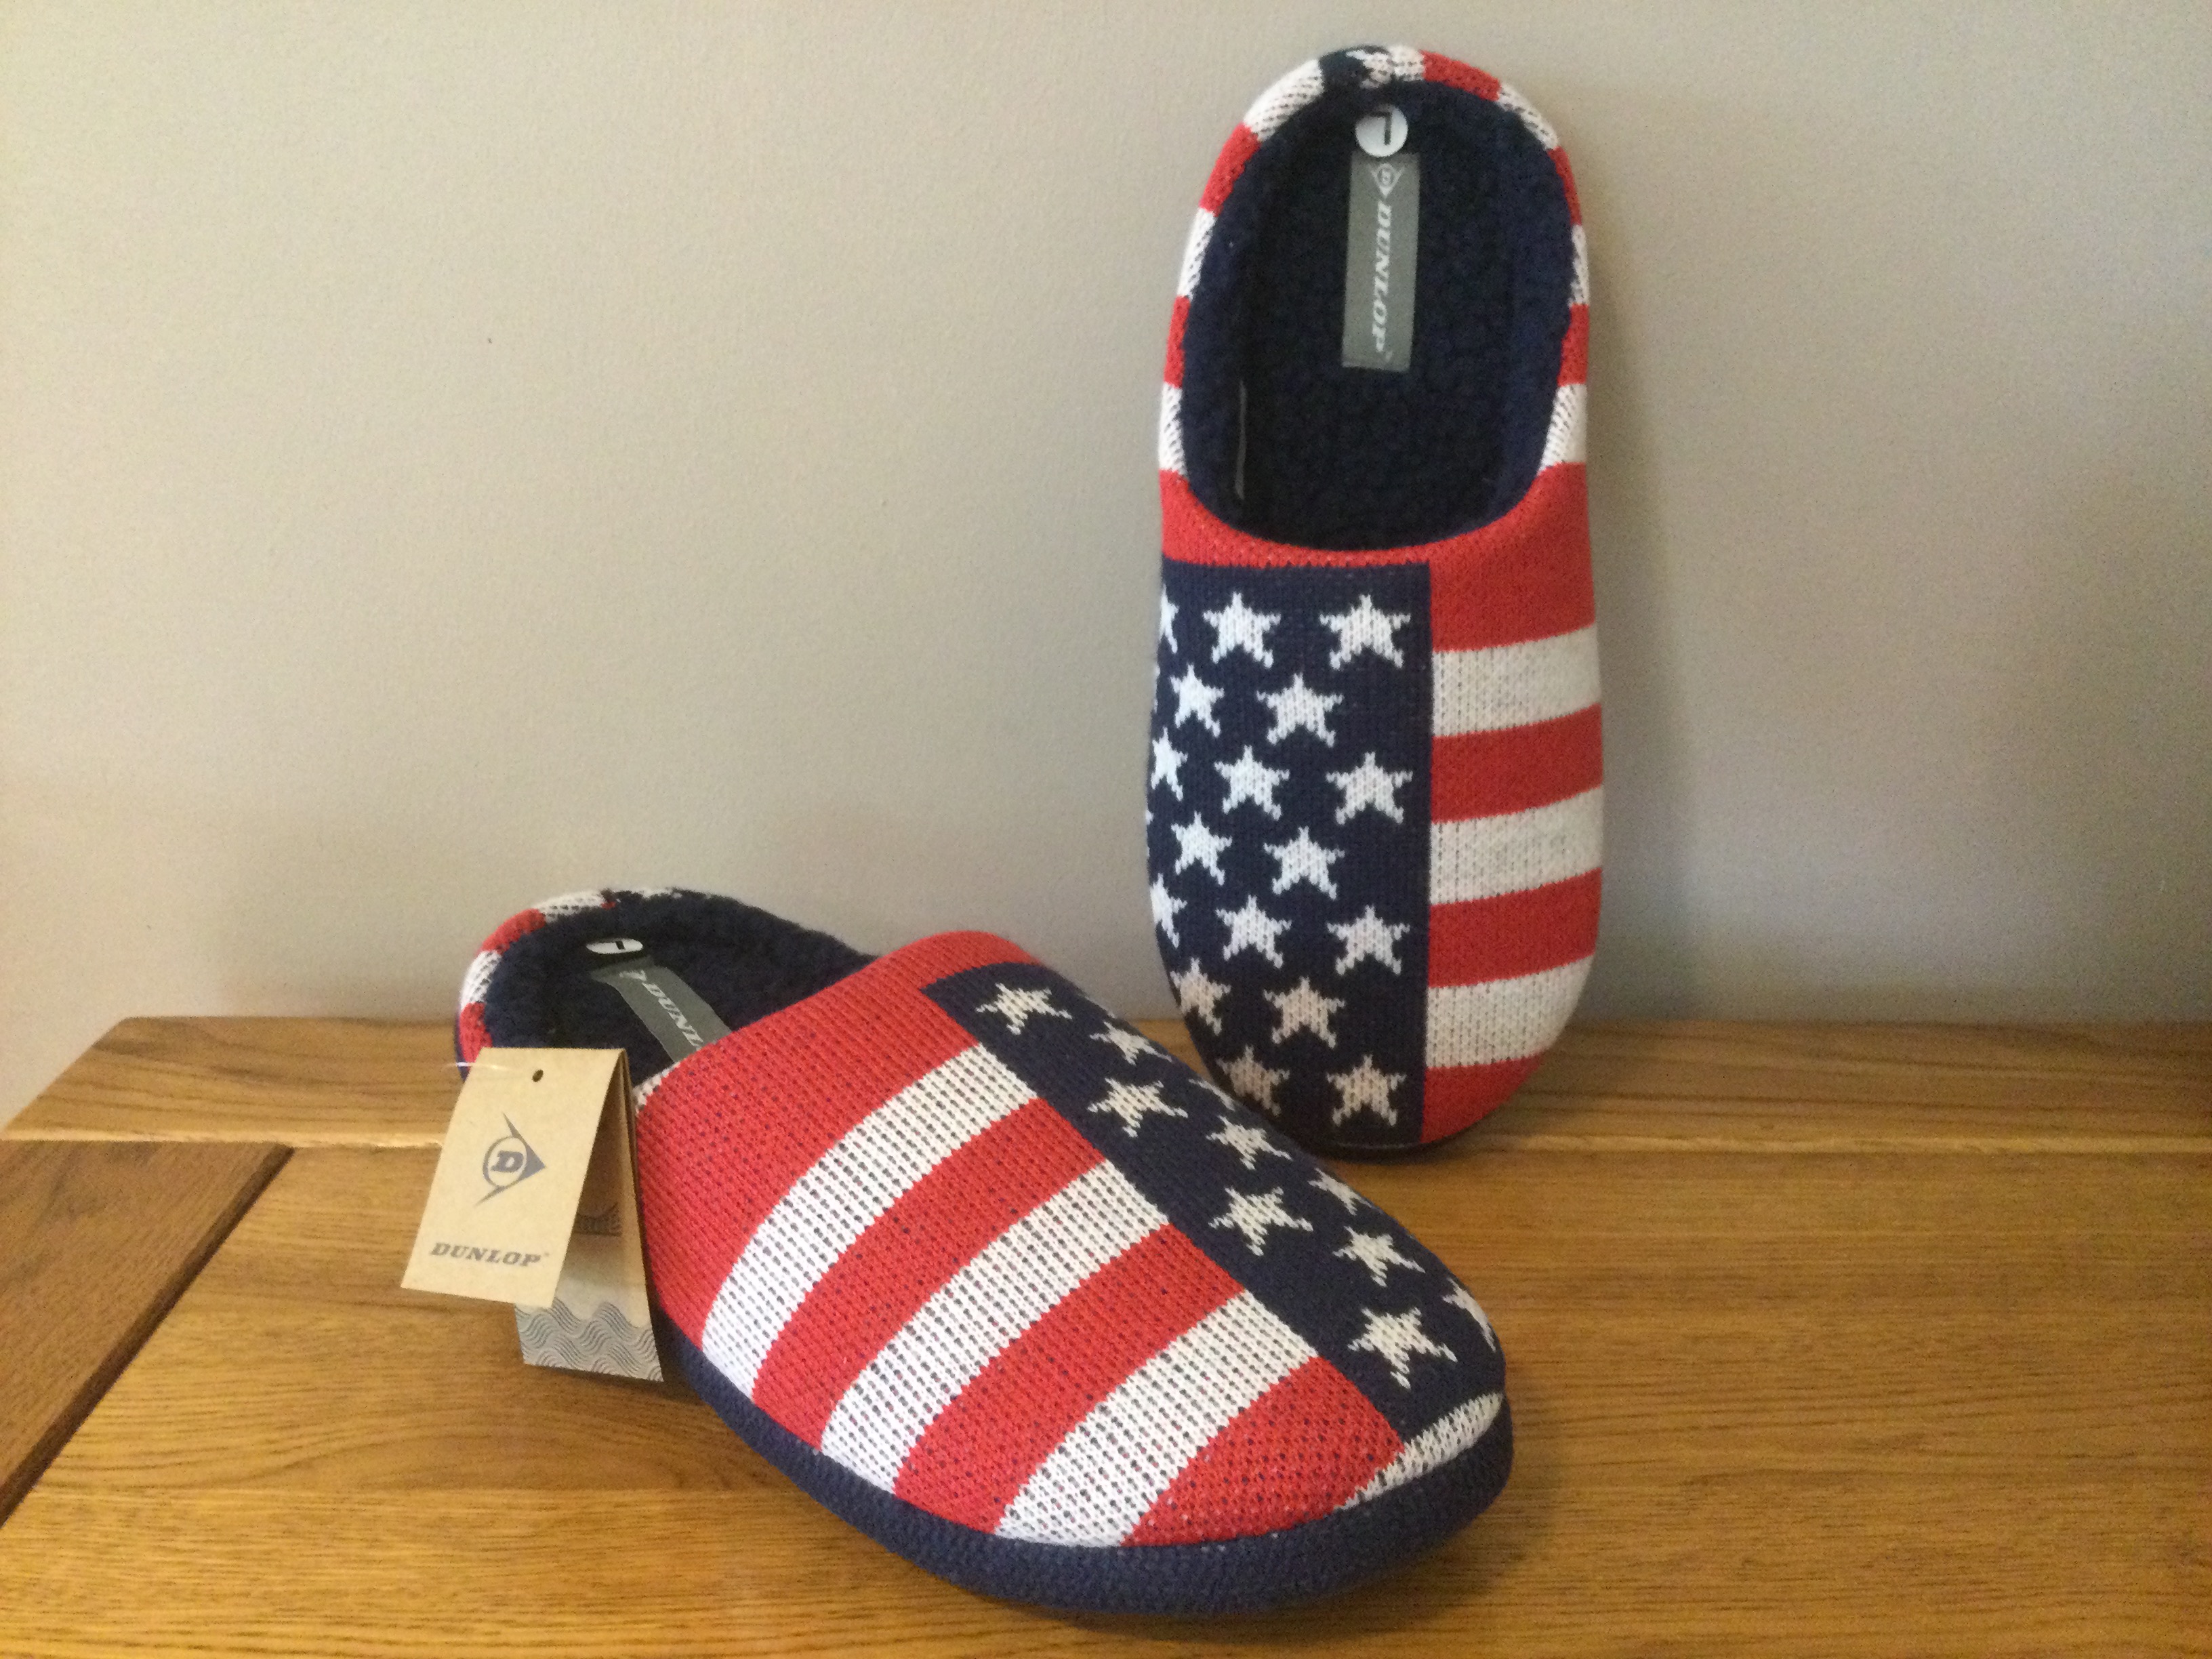 Job Lot 10 x Pairs Men's Dunlop, “USA Stars and Stripes” Memory Foam, Mule Slippers, Size L (10/1... - Image 7 of 7